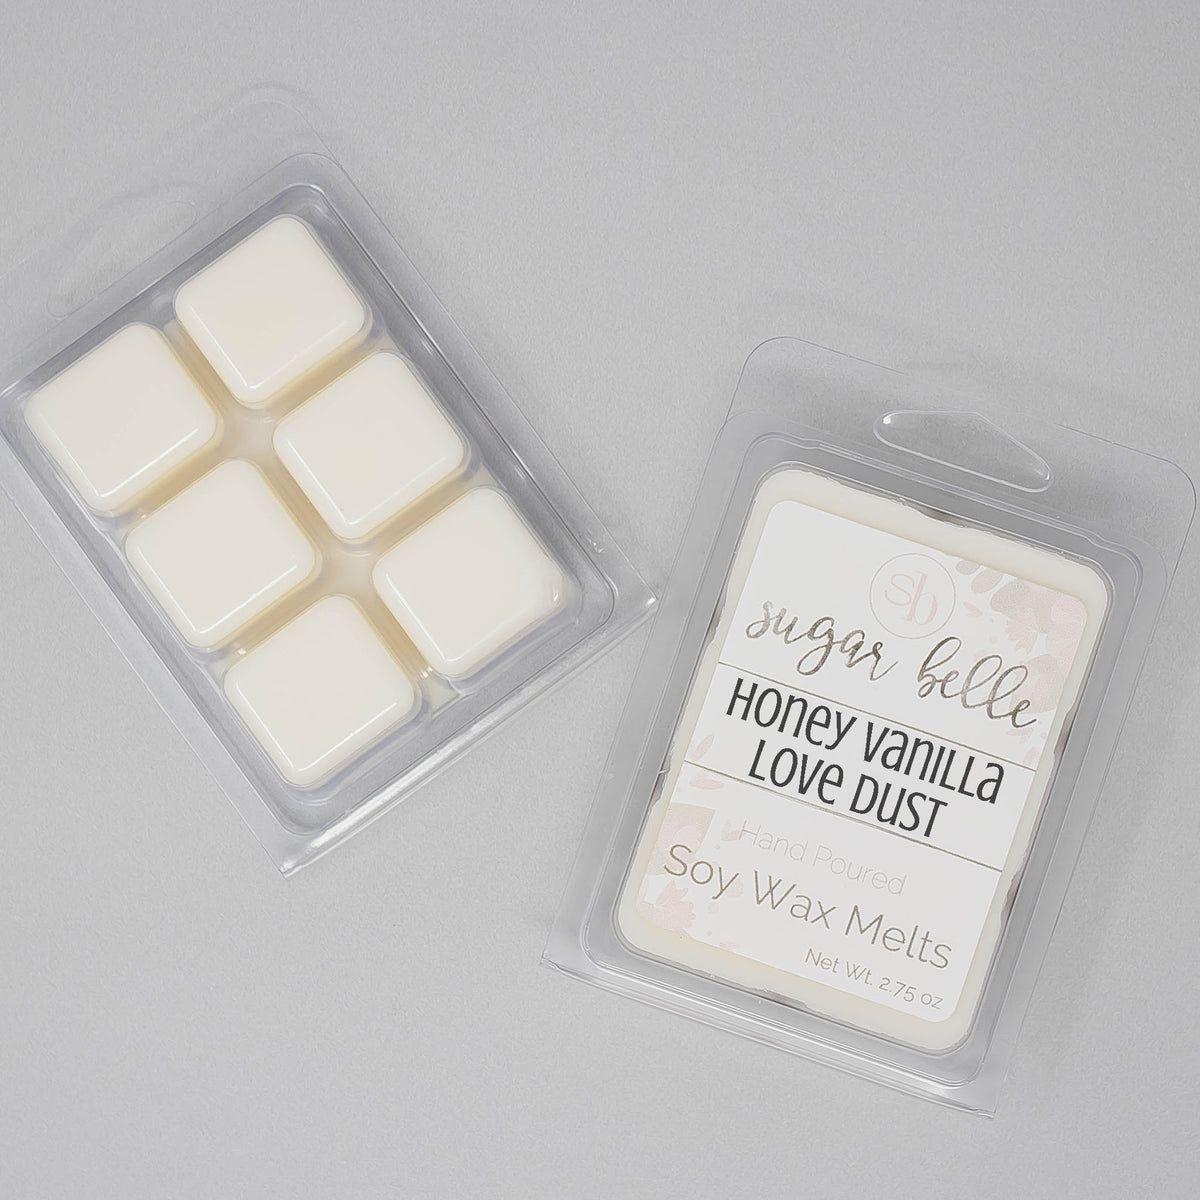 Honey Vanilla Love Dust Scented Soy Wax Melts – Sugar Belle Candles